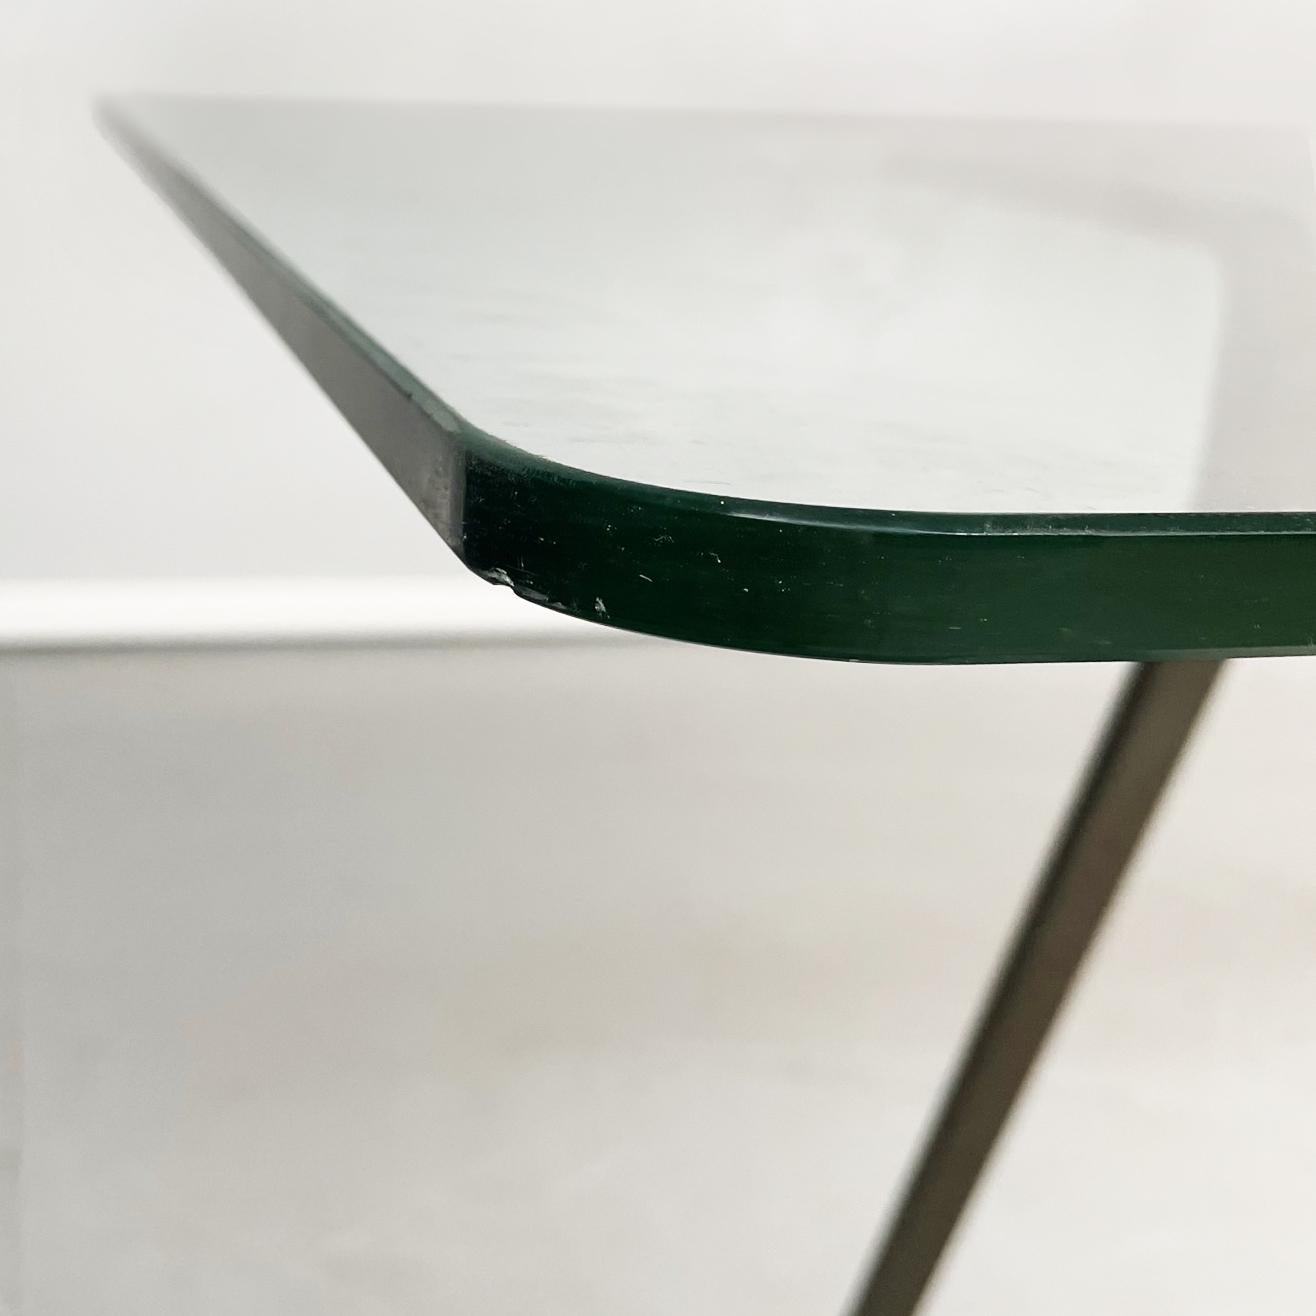 Italian Modern Glass Wood Steel Dining Table Frate by Enzo Mari for Driade, 1973 For Sale 2